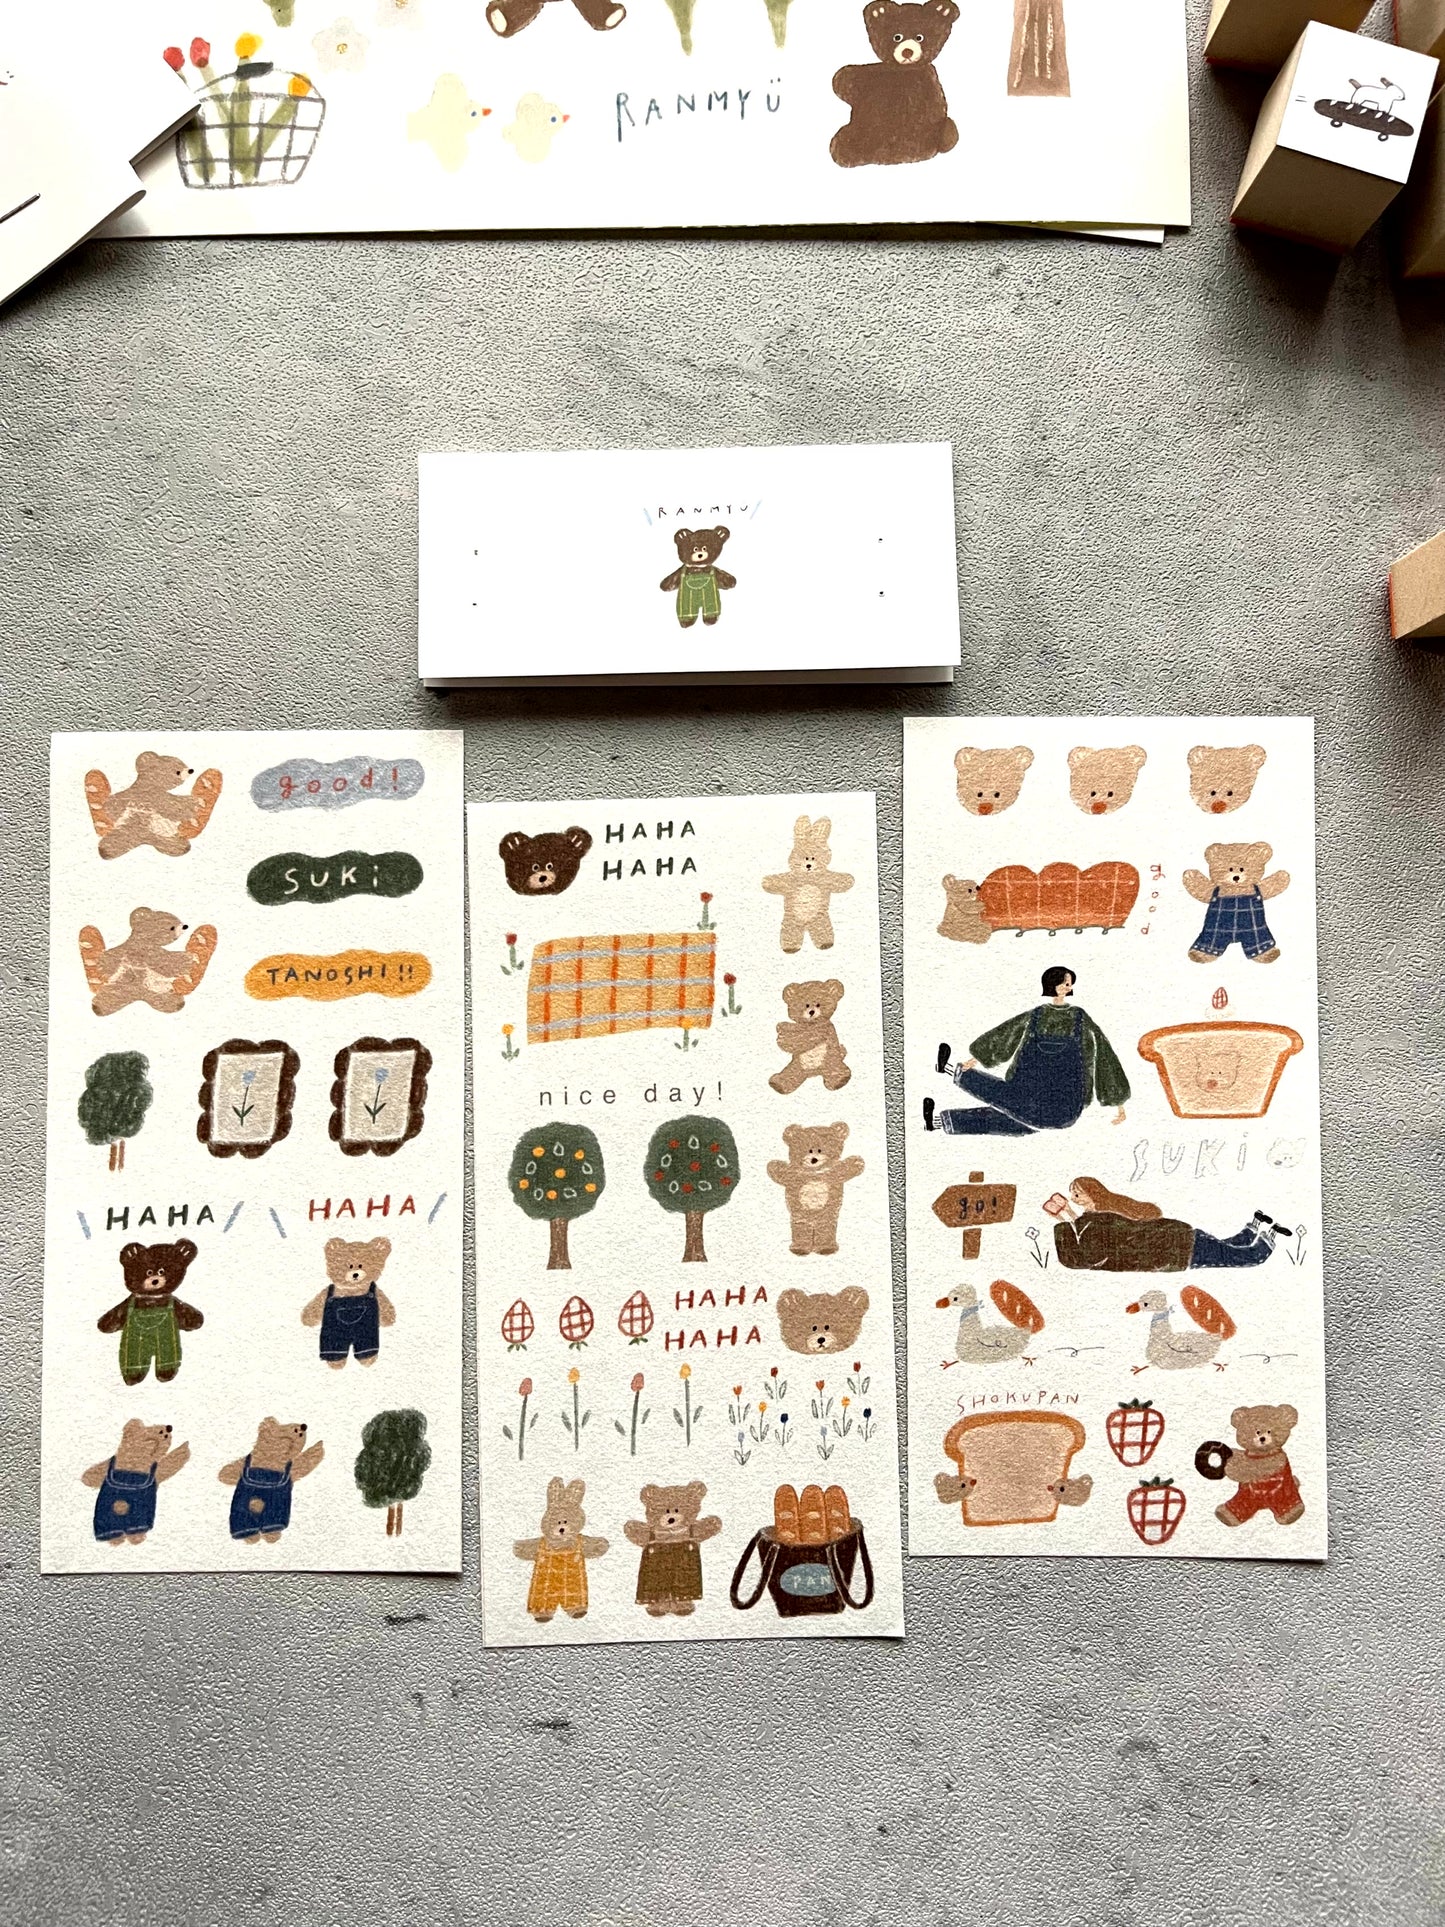 Ranmyu Self-Cut Sticker Pack // Bread Delivery